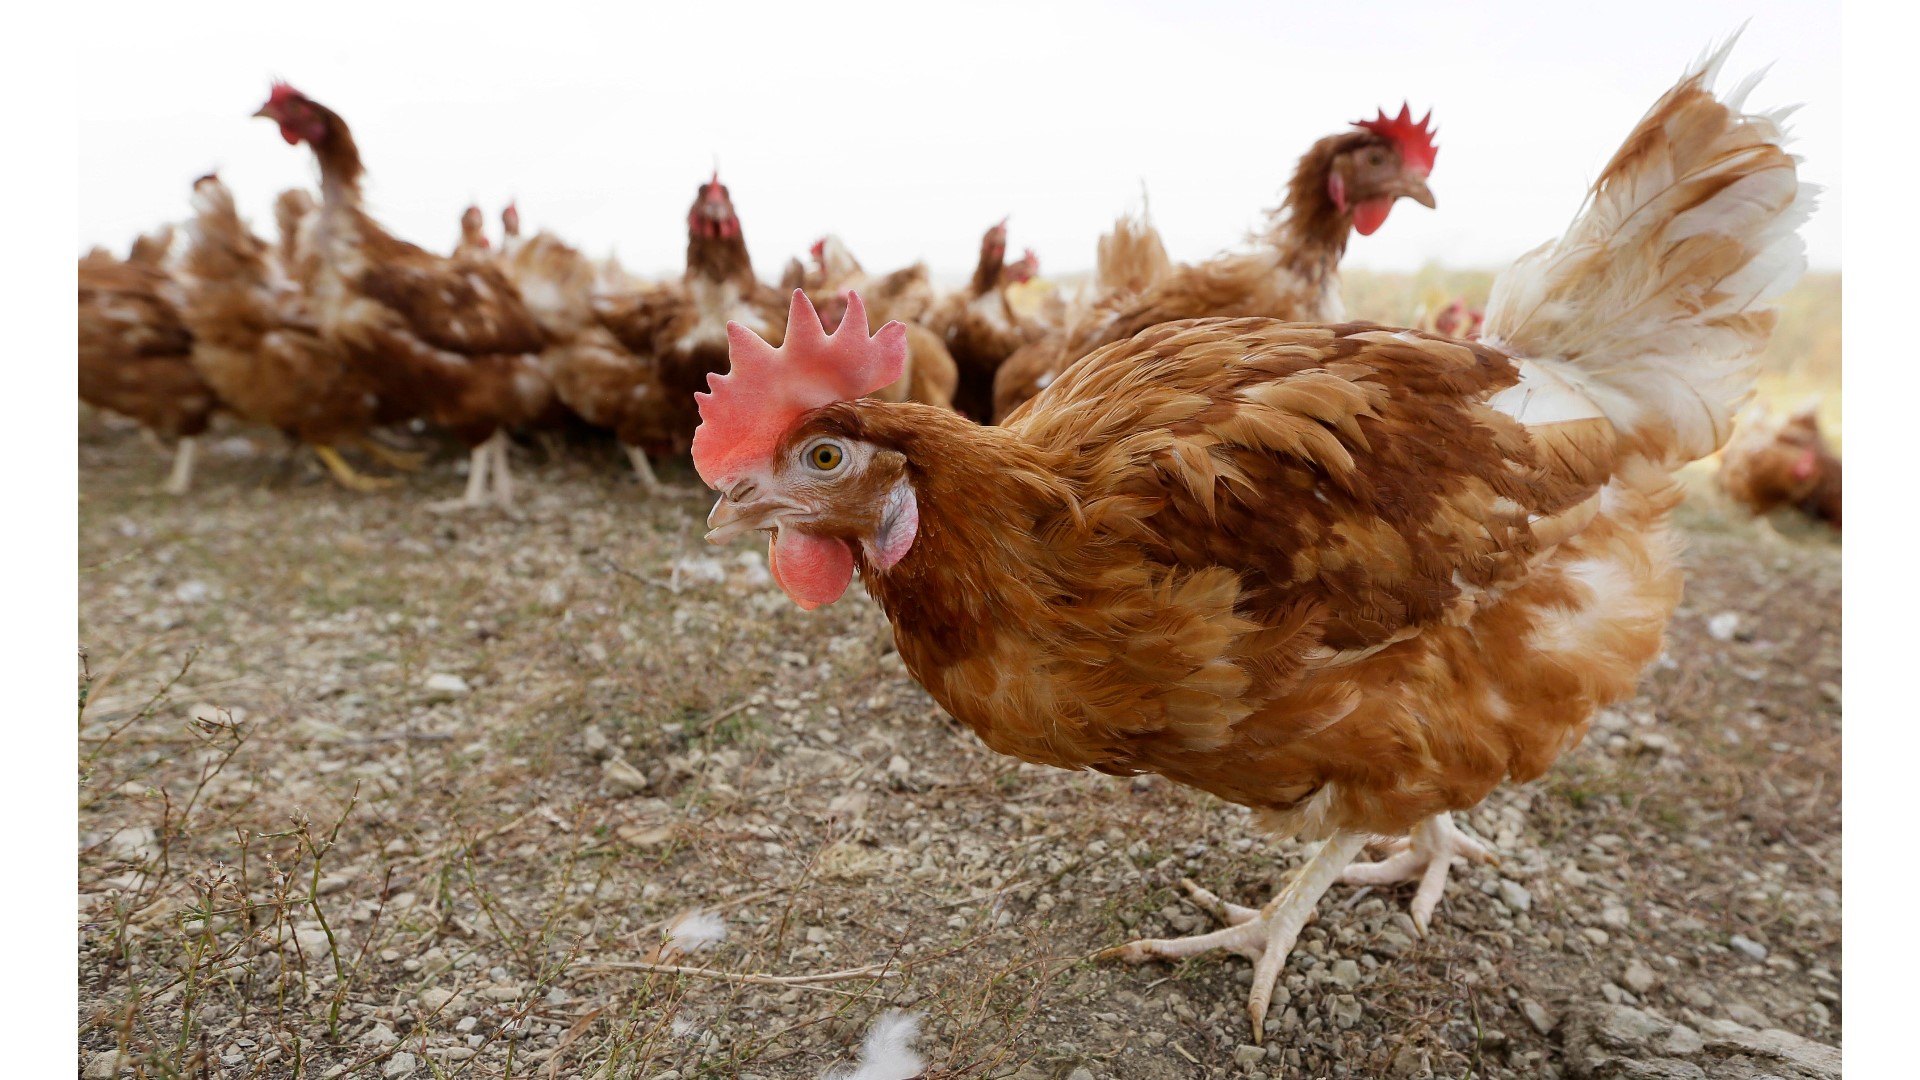 Iowa has had 15 commercial farms infected this year, including turkeys, egg-laying hens and other chickens.